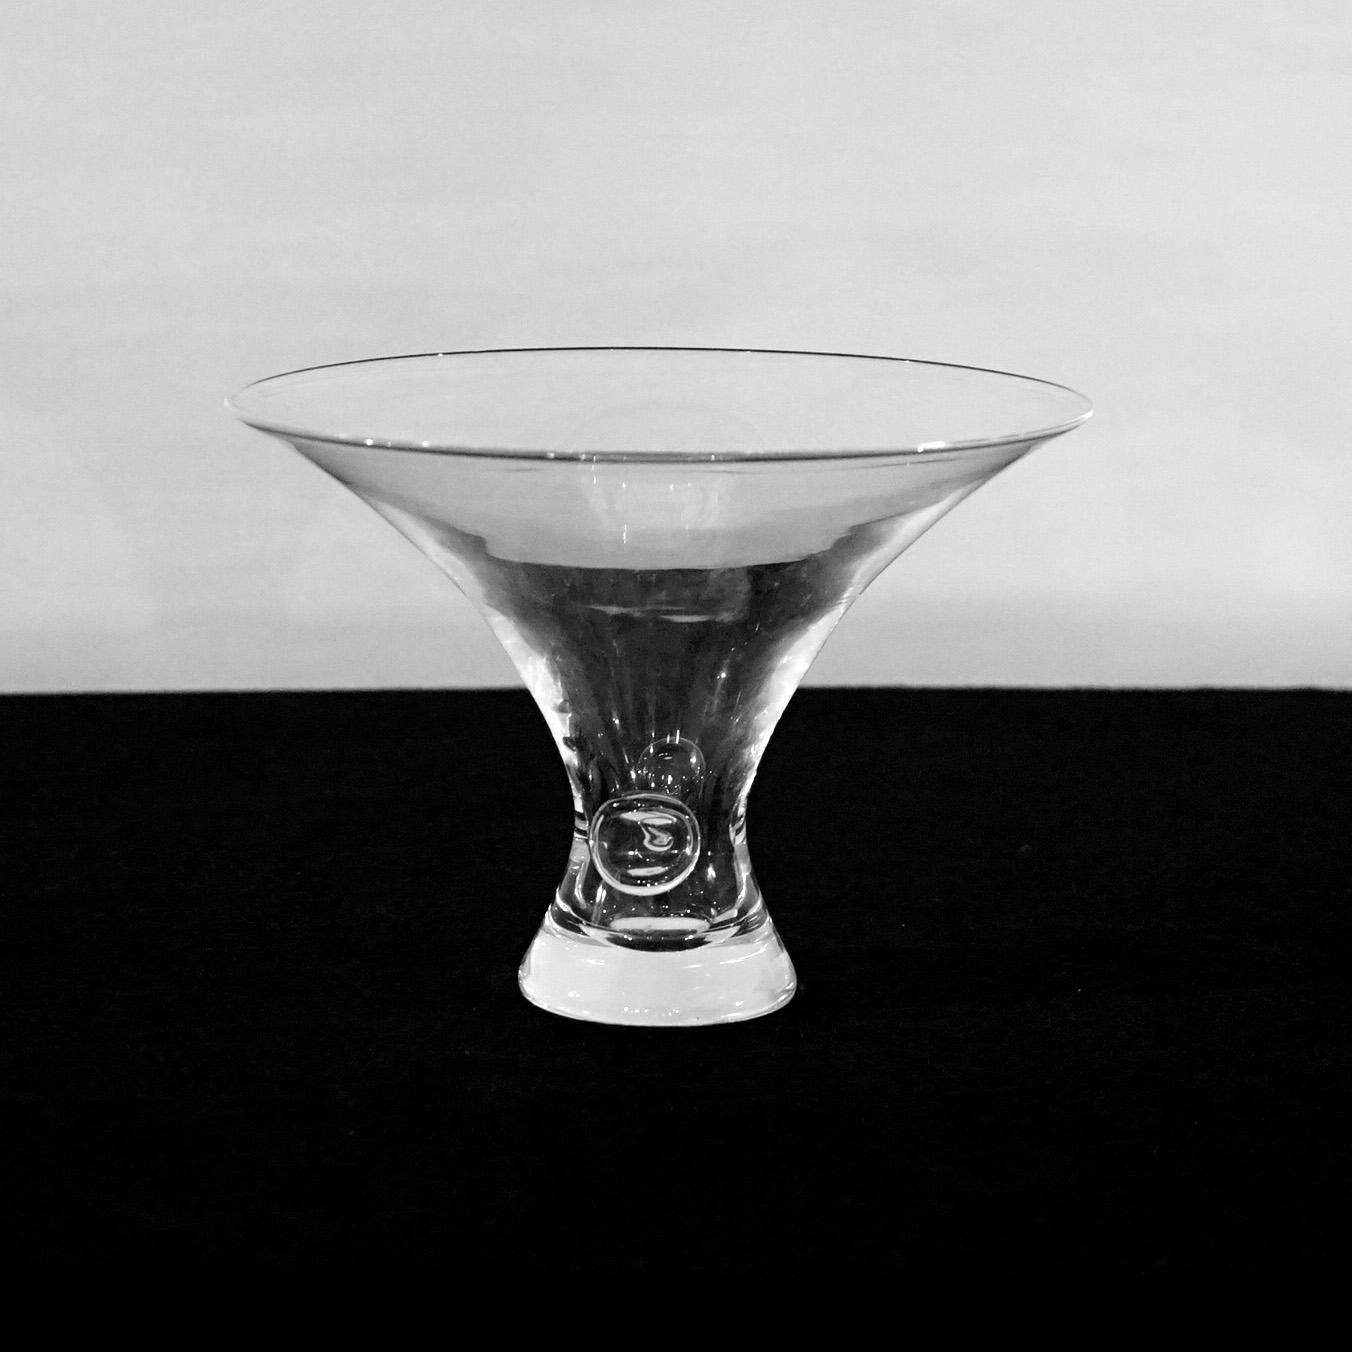 Mid Century Modern Steuben Art Glass Flared Crystal Bowl with Pinched Base, Signed,  20thC

Measures - 9.5